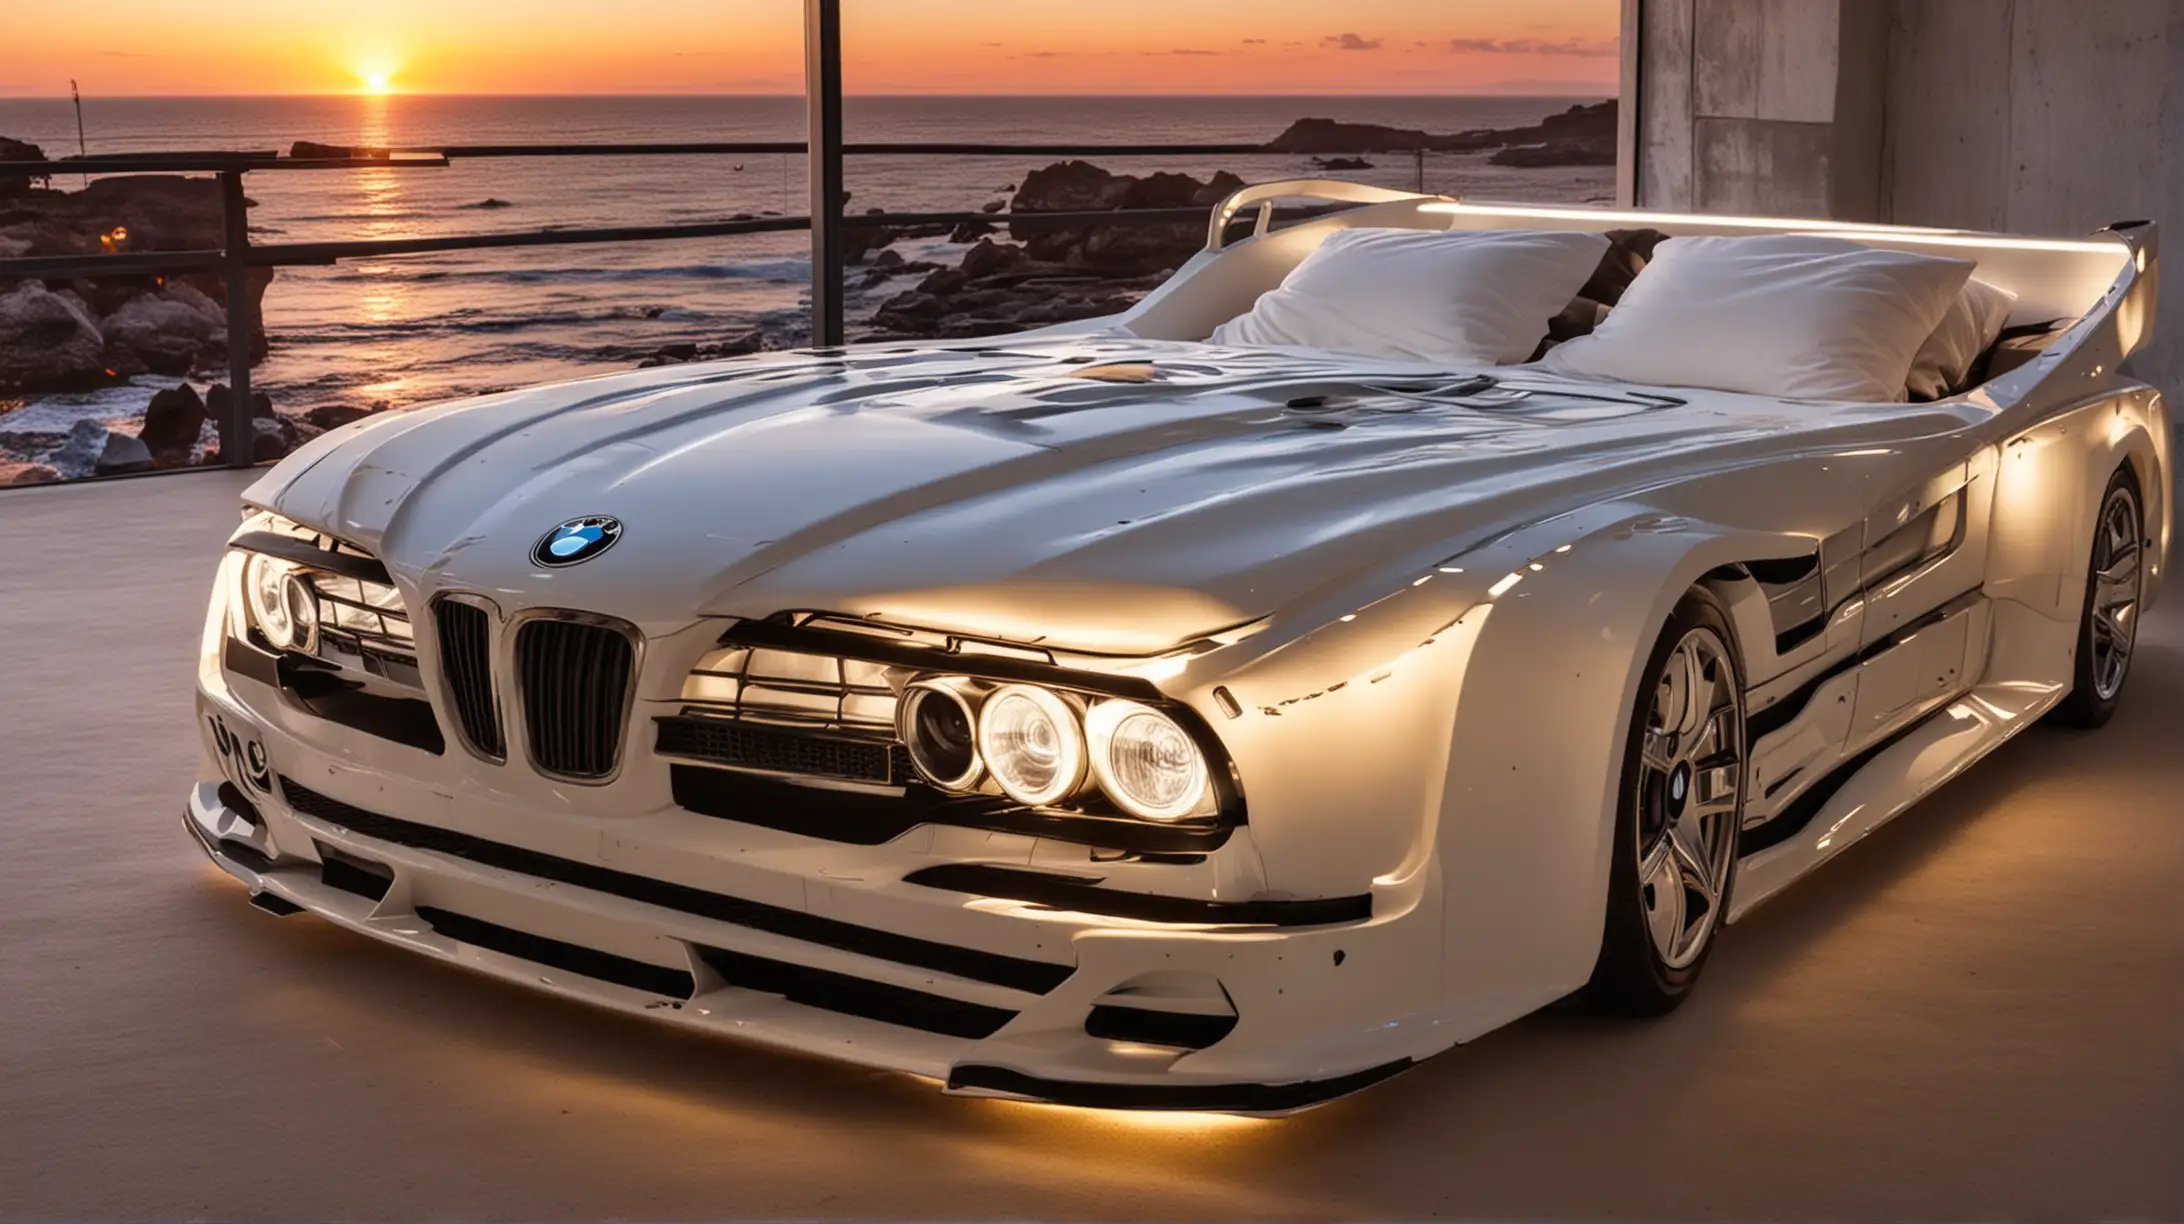 Double bed in the shape of a BMW car with headlights on and sunset graphics